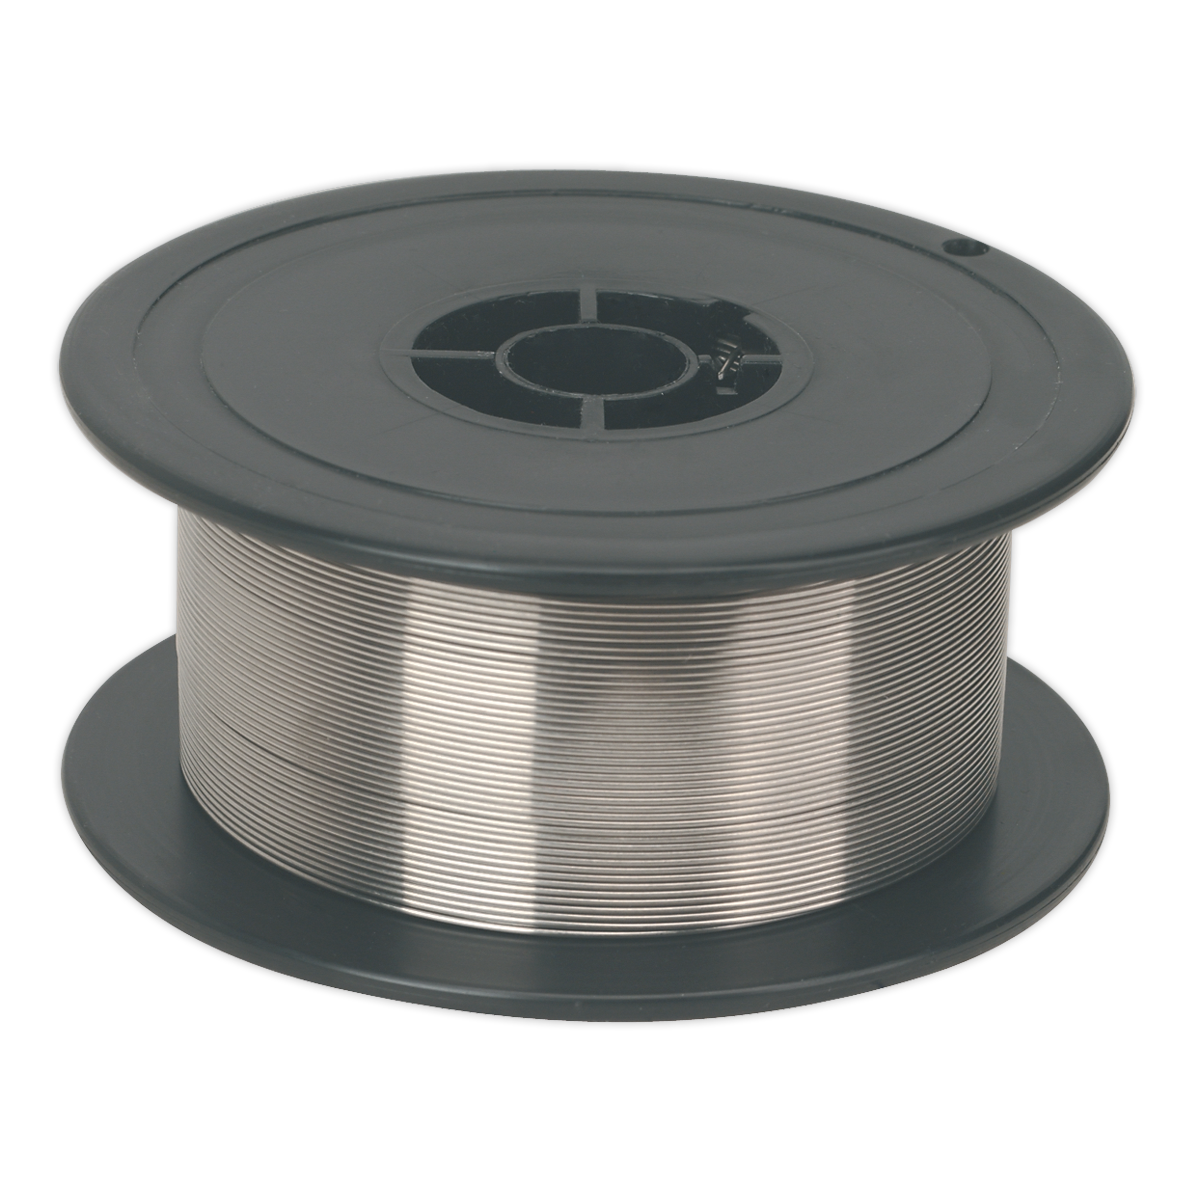 SEALEY - MIG/1K/SS08 Stainless Steel MIG Wire 1kg Ø0.8mm 308(S)93 Grade